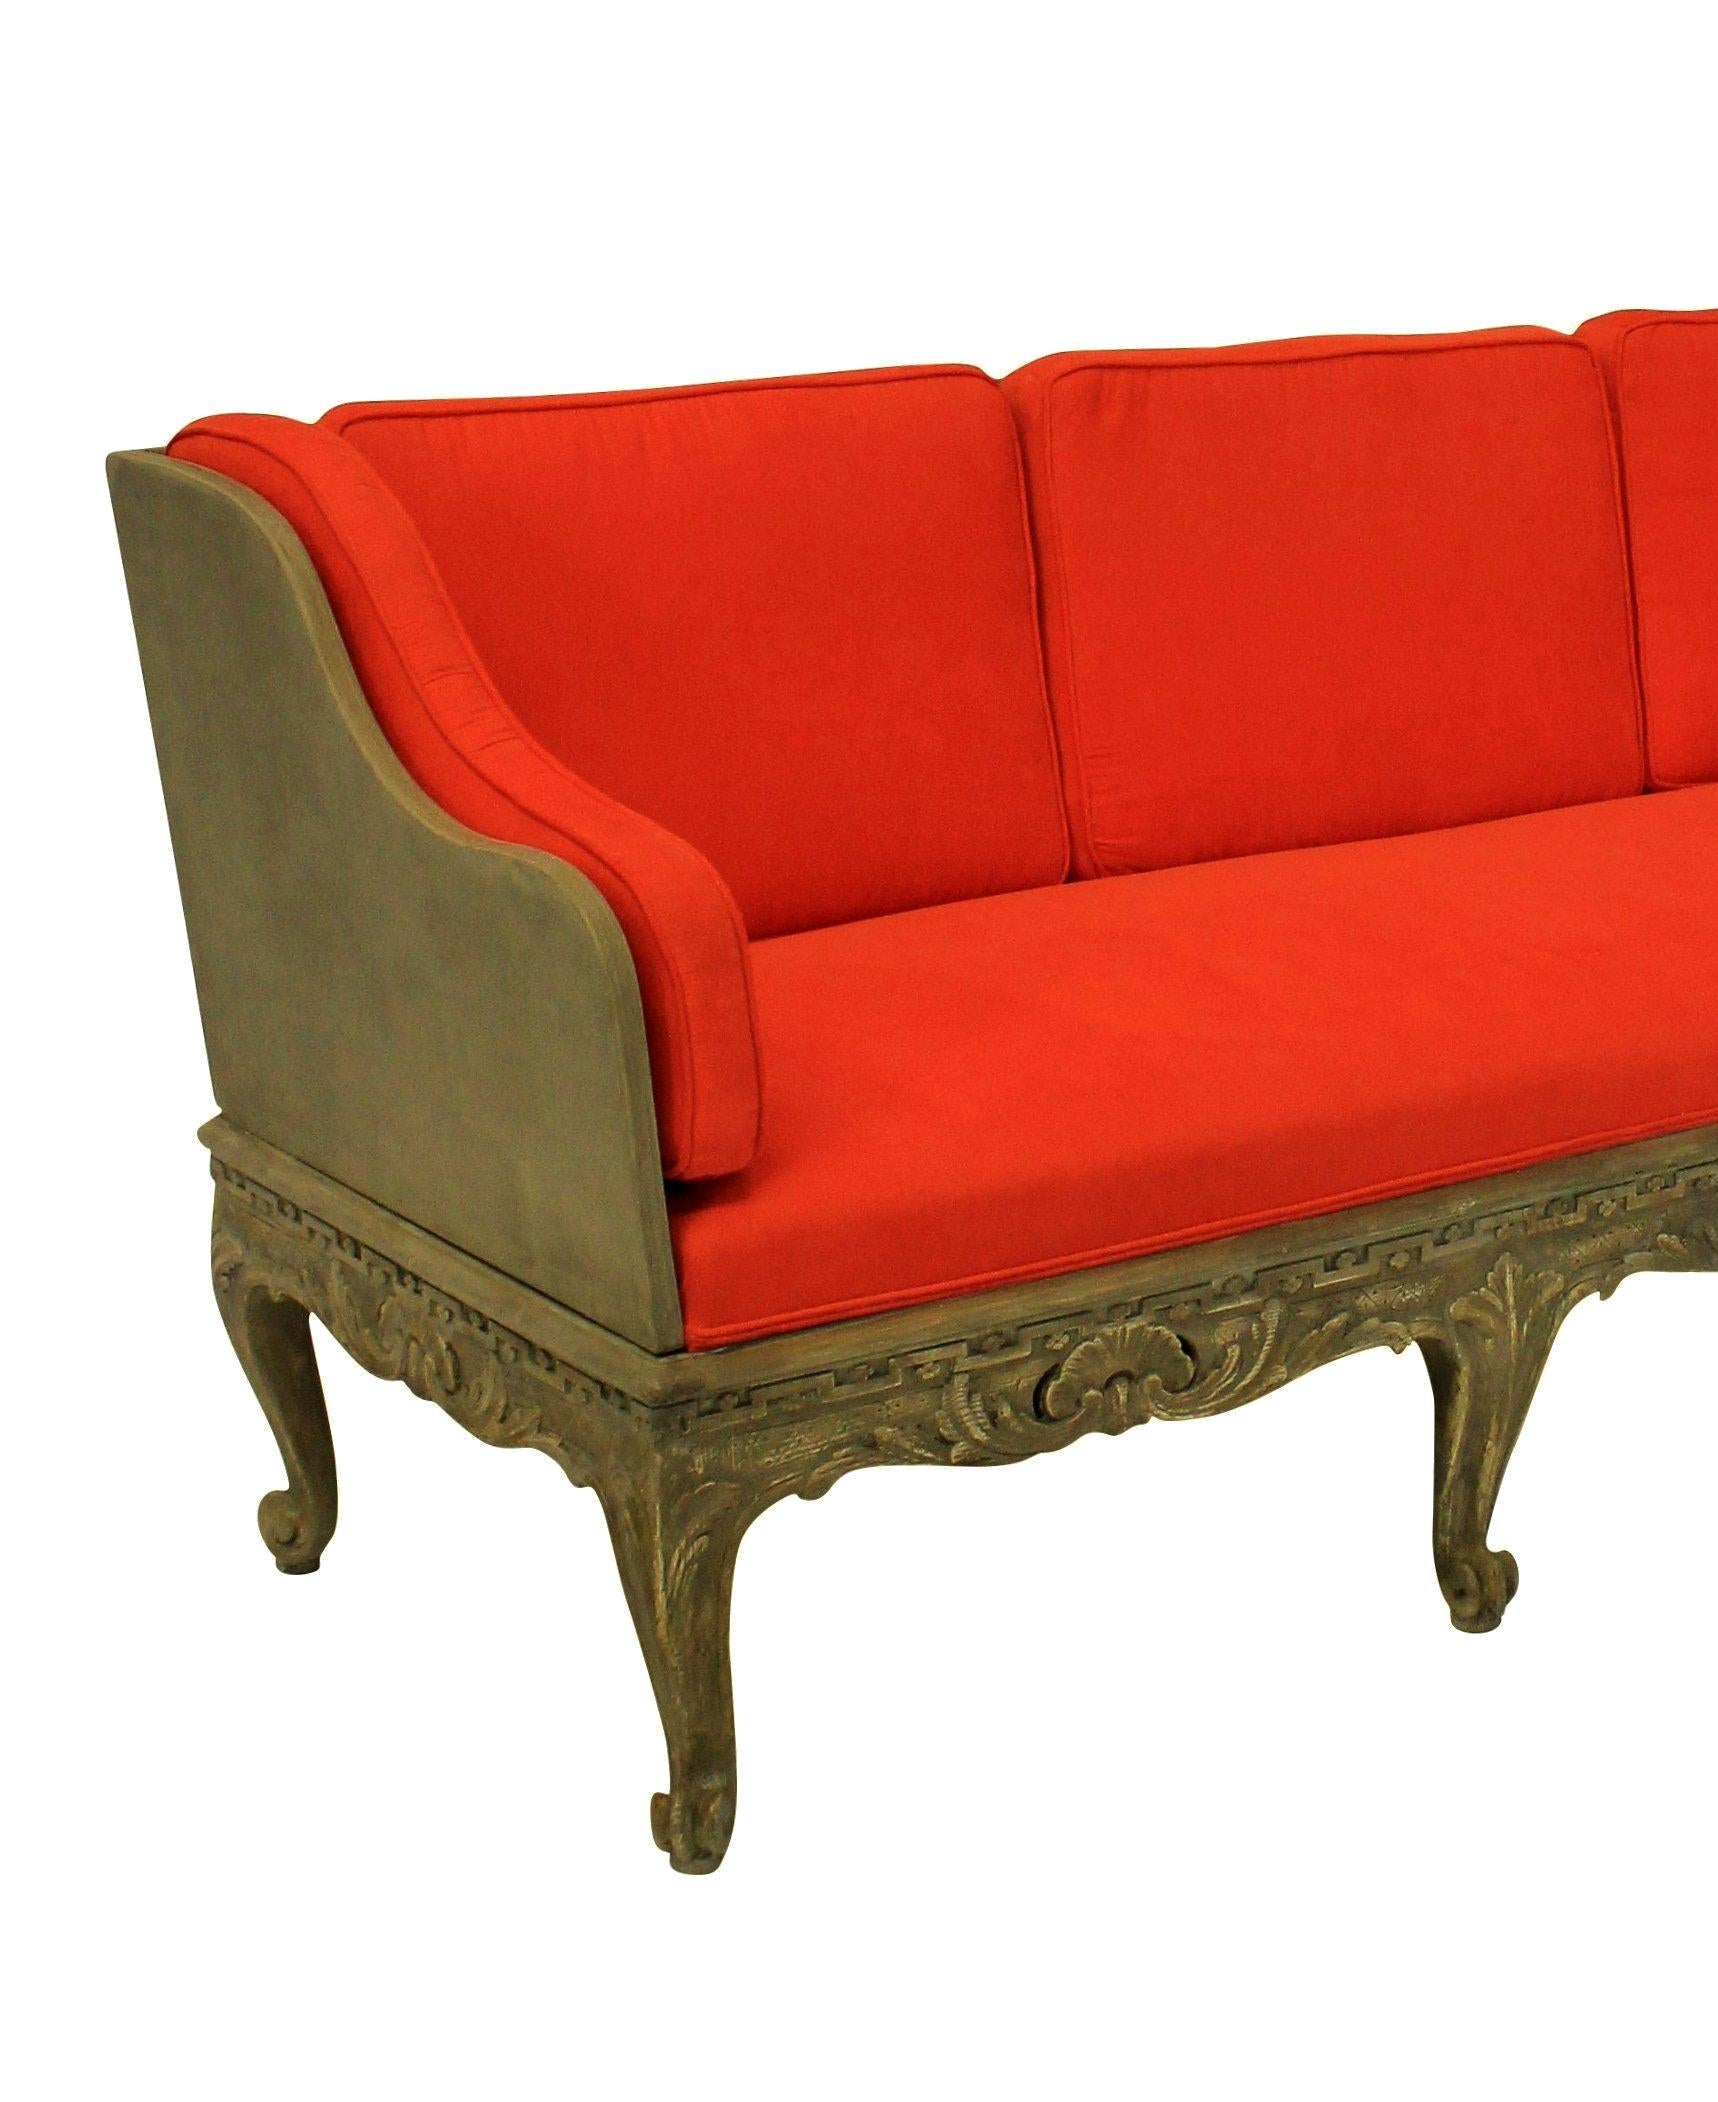 Early 20th Century Large Swedish Carved and Painted Settee in Orange Corduroy